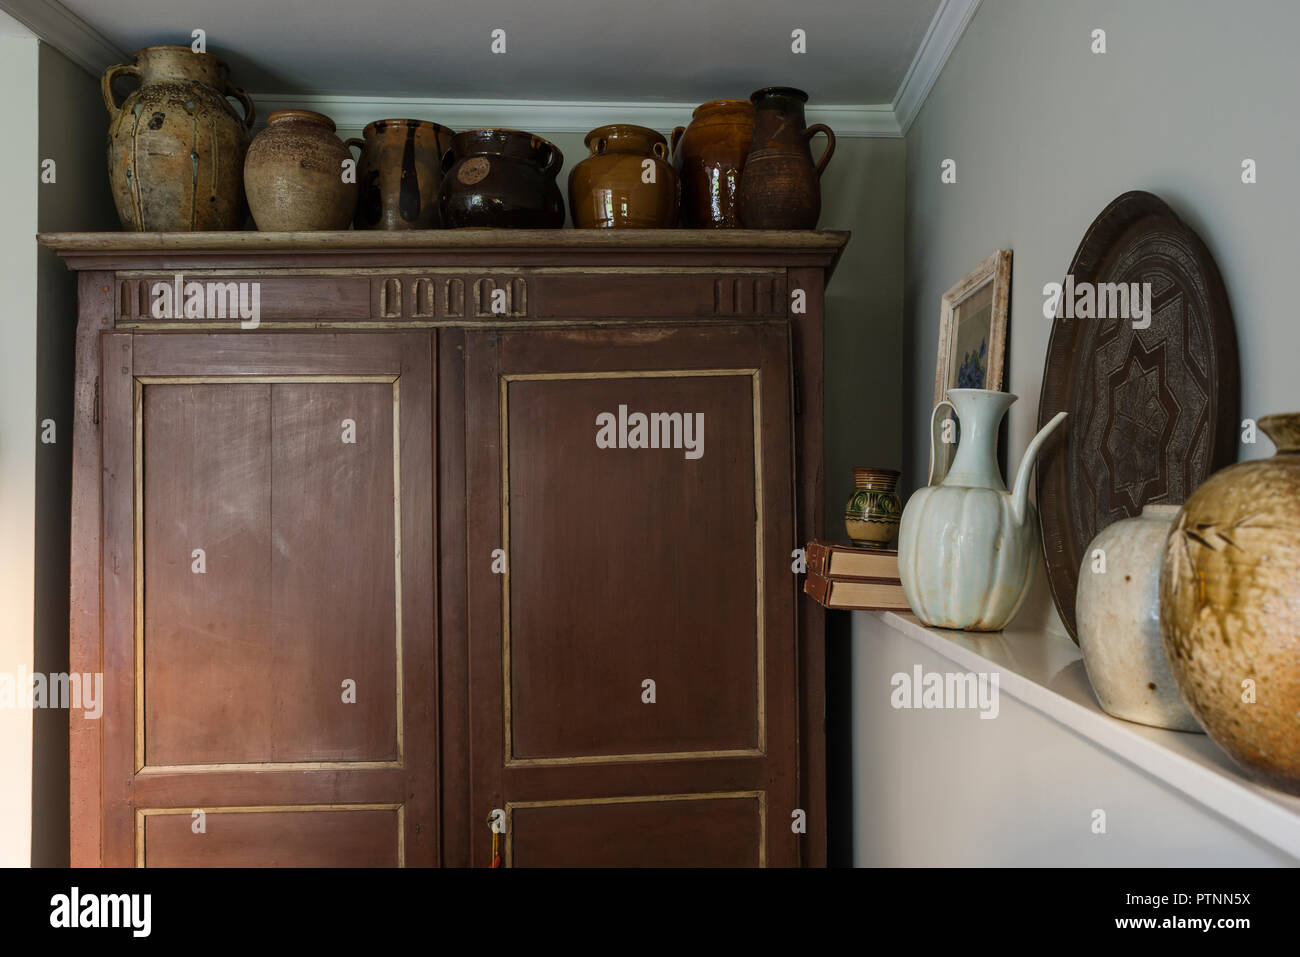 French salt-glazed cruches jugs are arranged along the top of the rustic French painted armoire Stock Photo